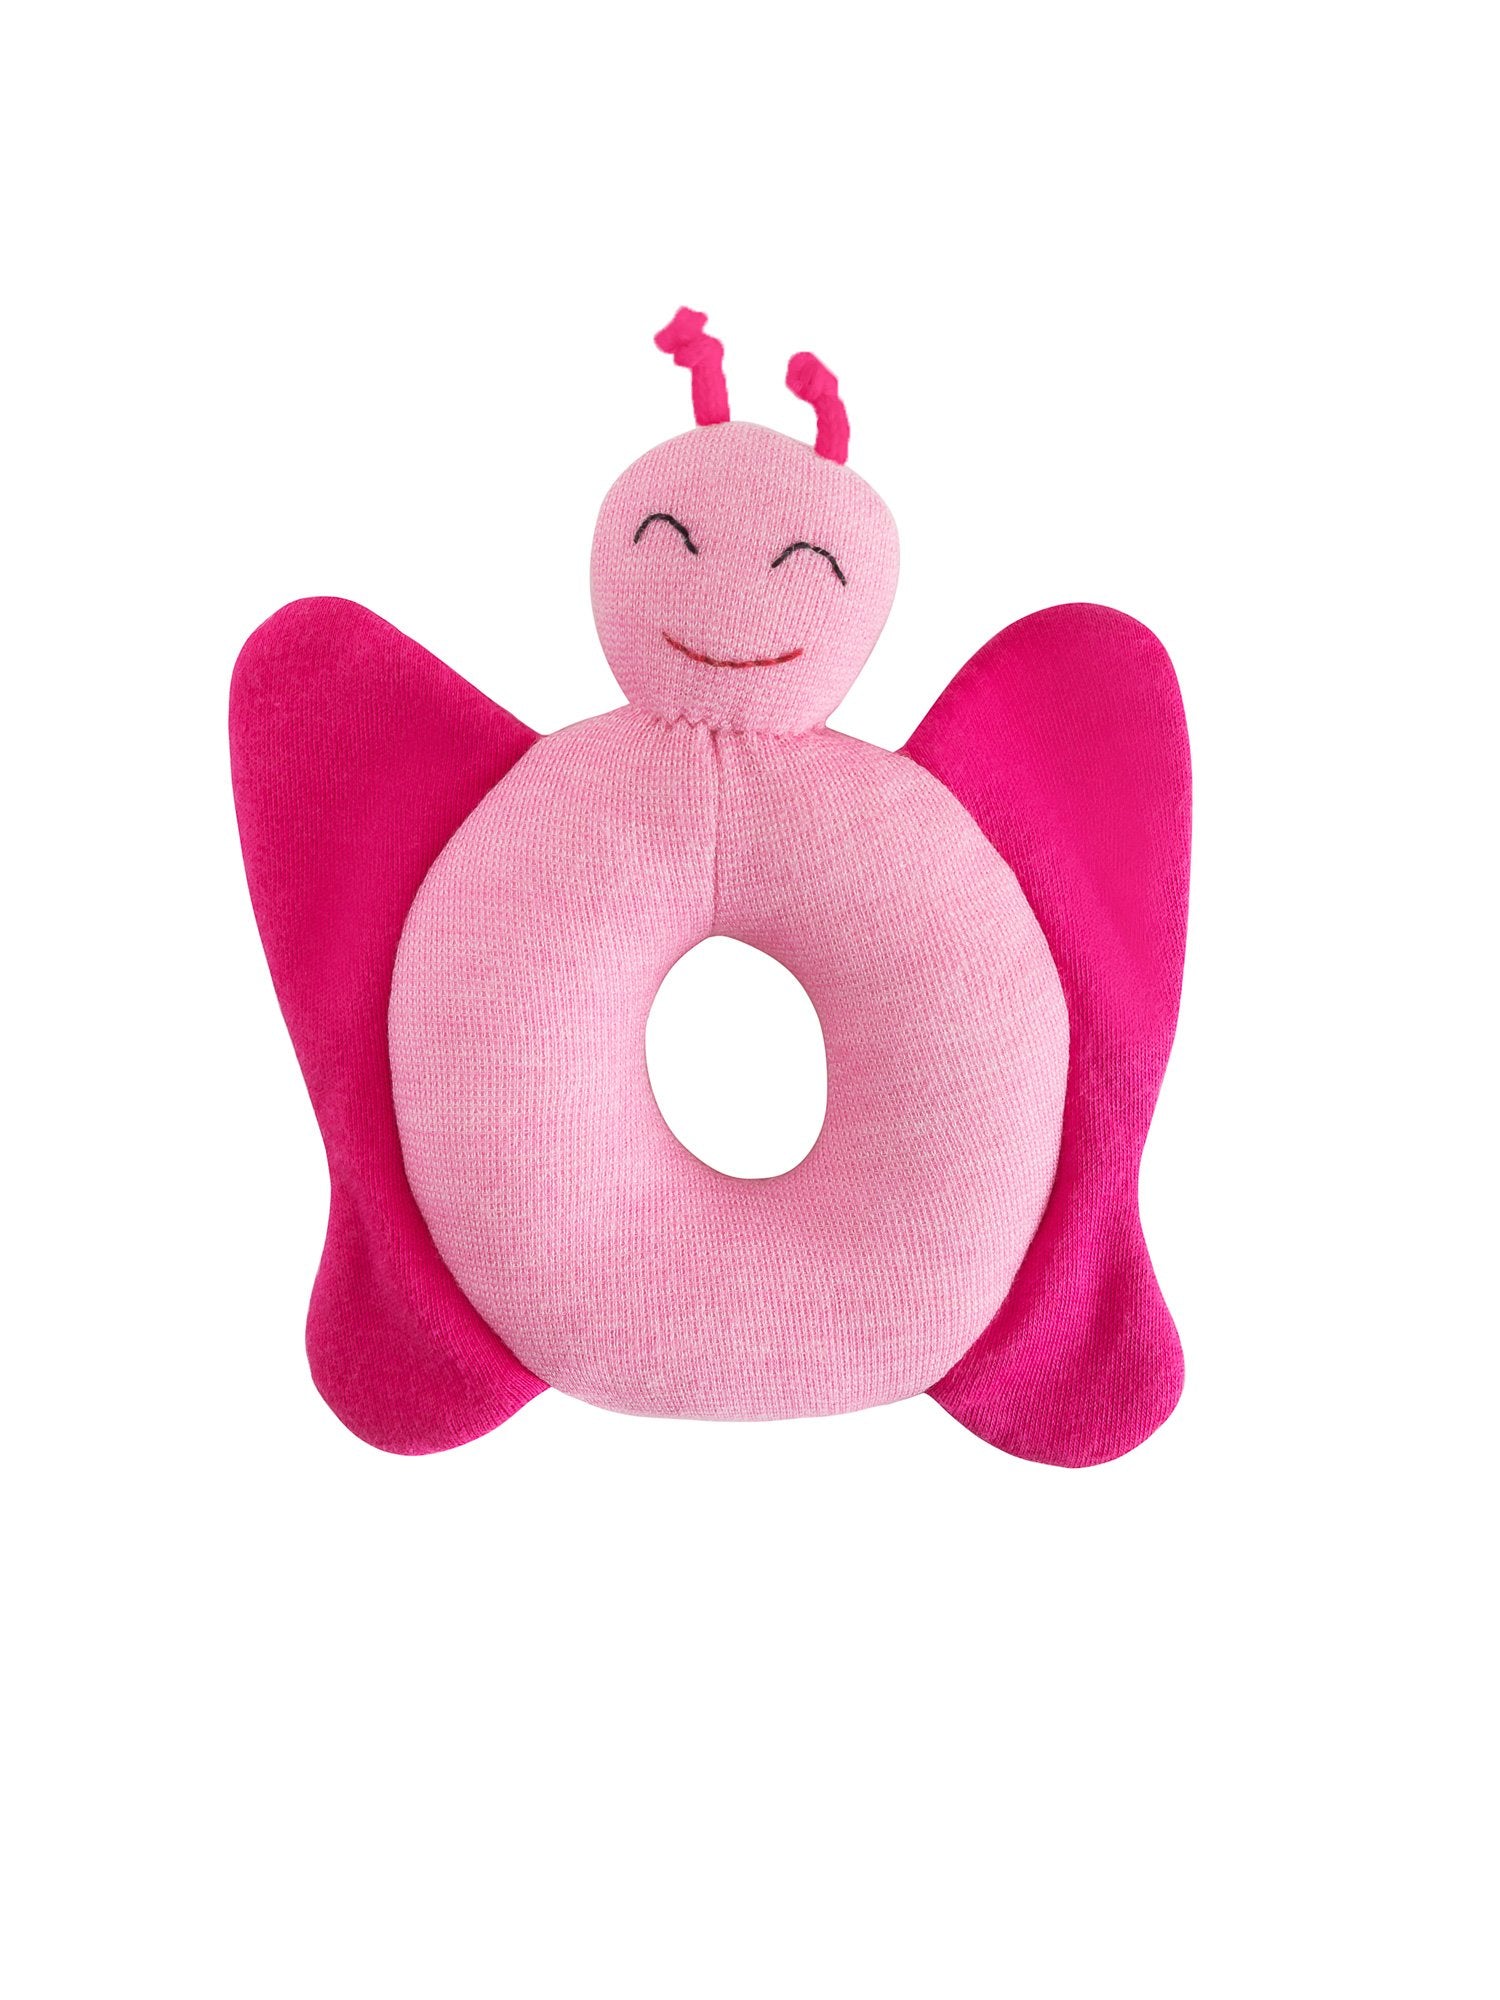 butterfly plush toy